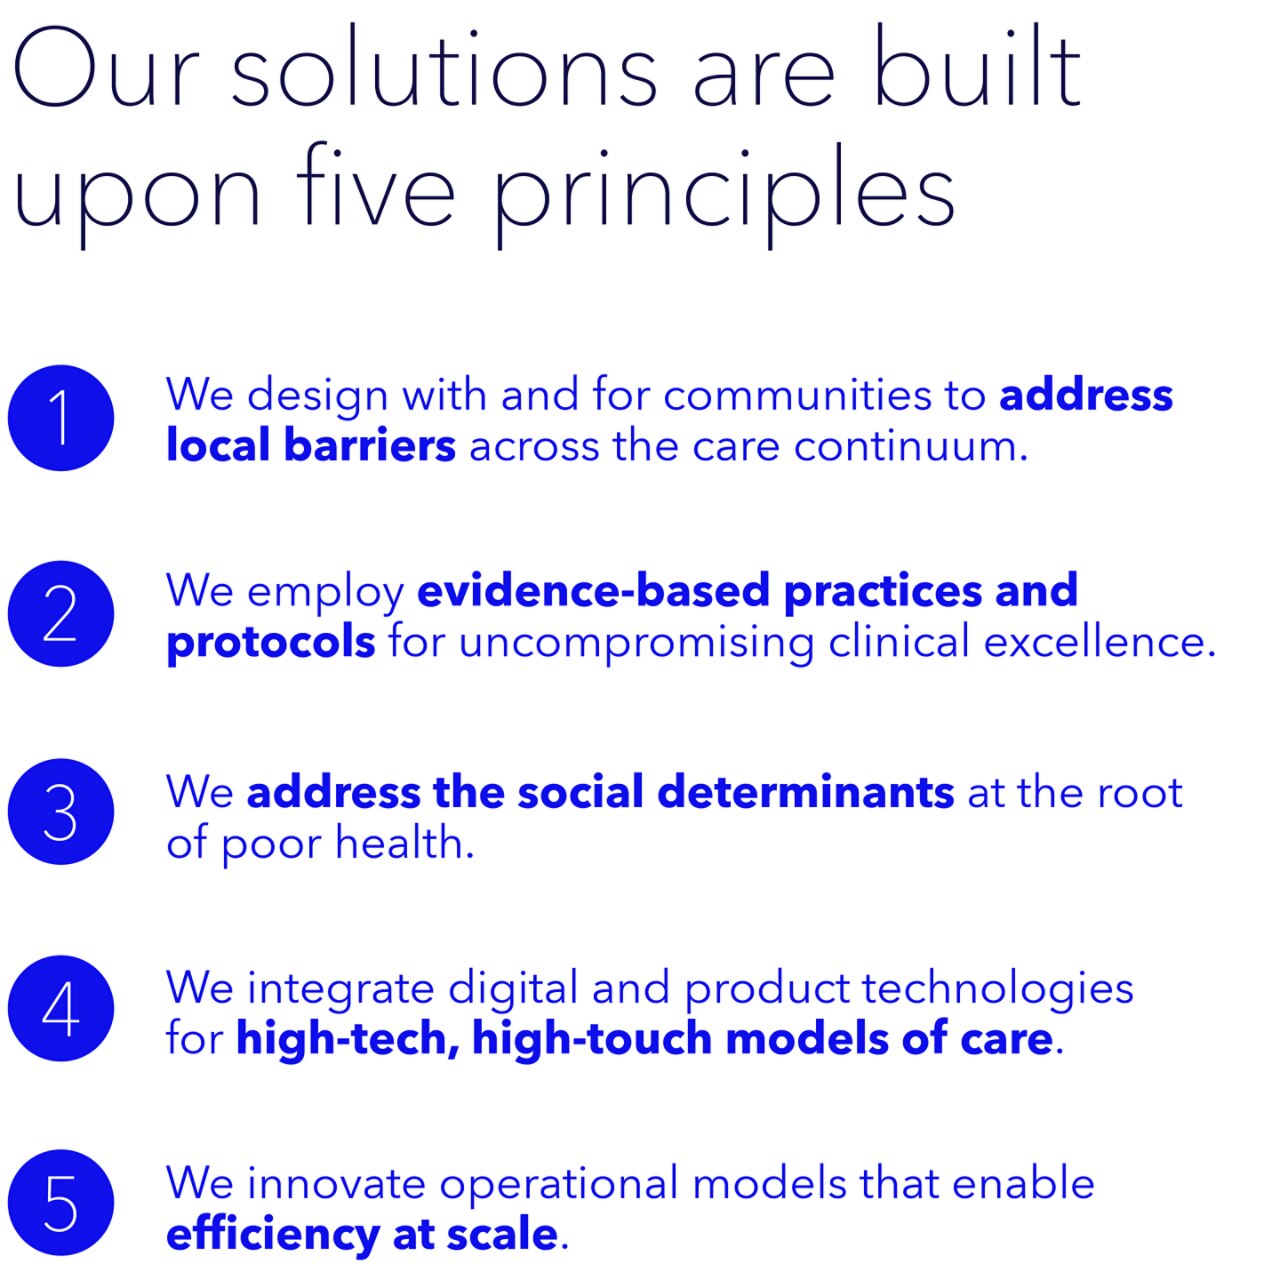 Our solutions are built on five principles: address local barriers; evidence-based practices and protocols; address the social determinants; high-tech, high-touch models of care; efficiency at scale